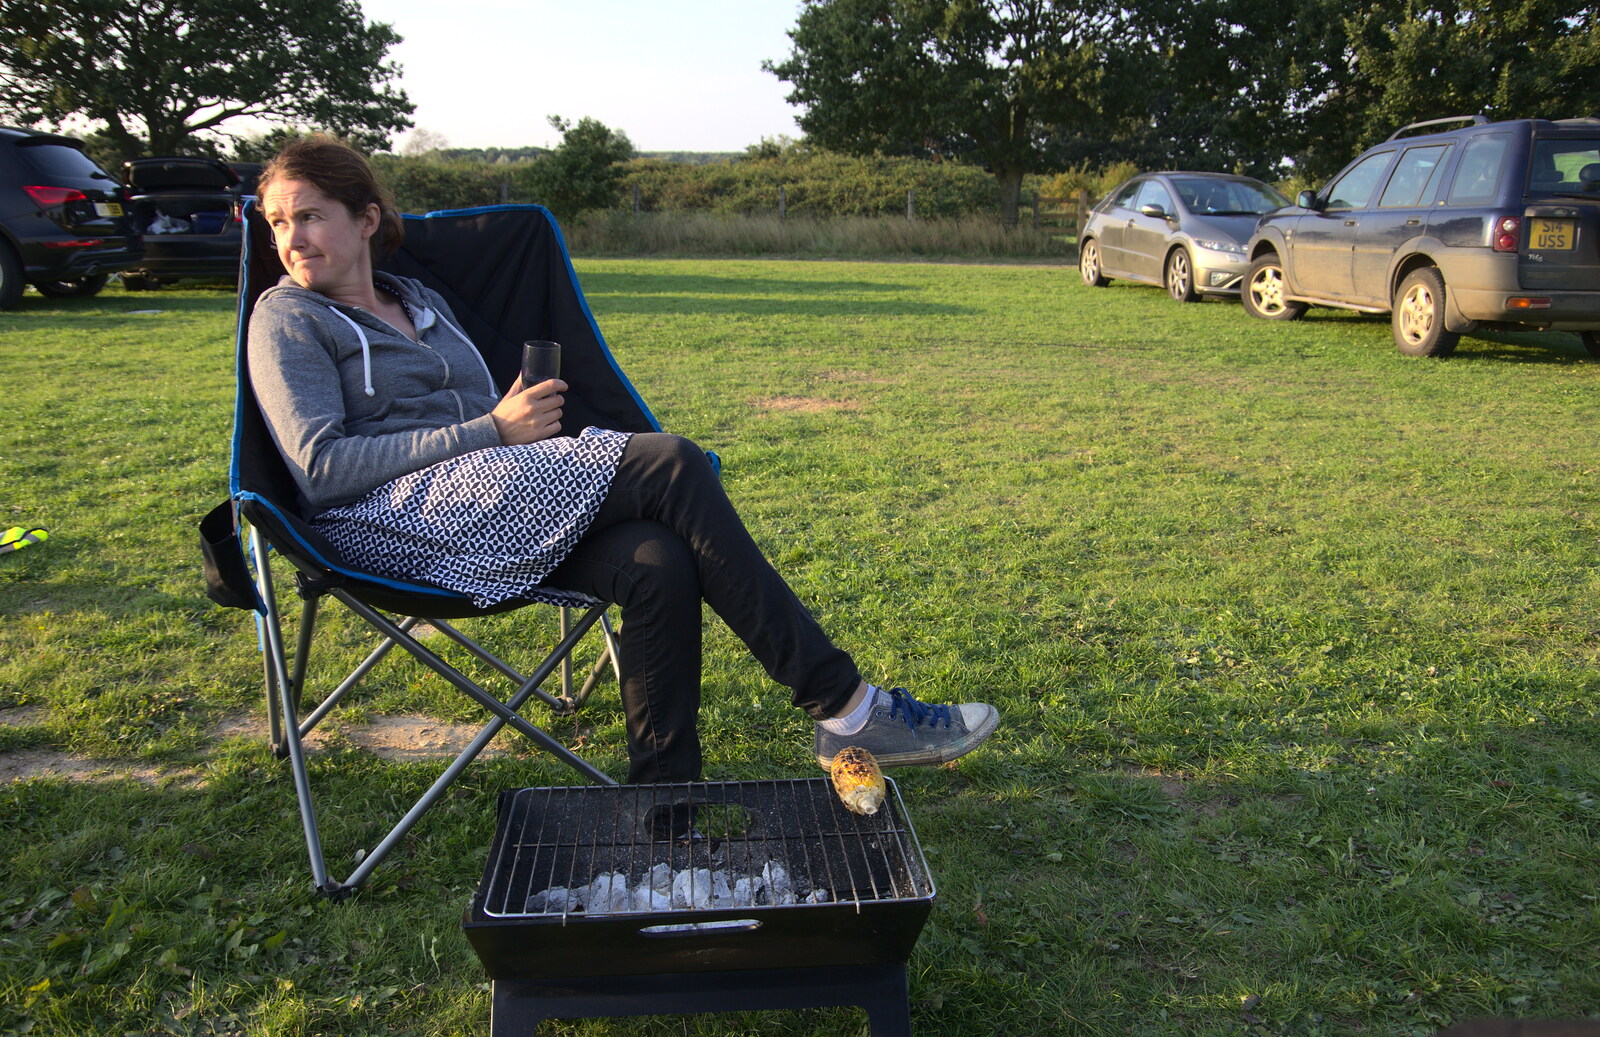 Isobel looks round from A Spot of Camping, Alton Water, Stutton, Suffolk - 1st September 2018